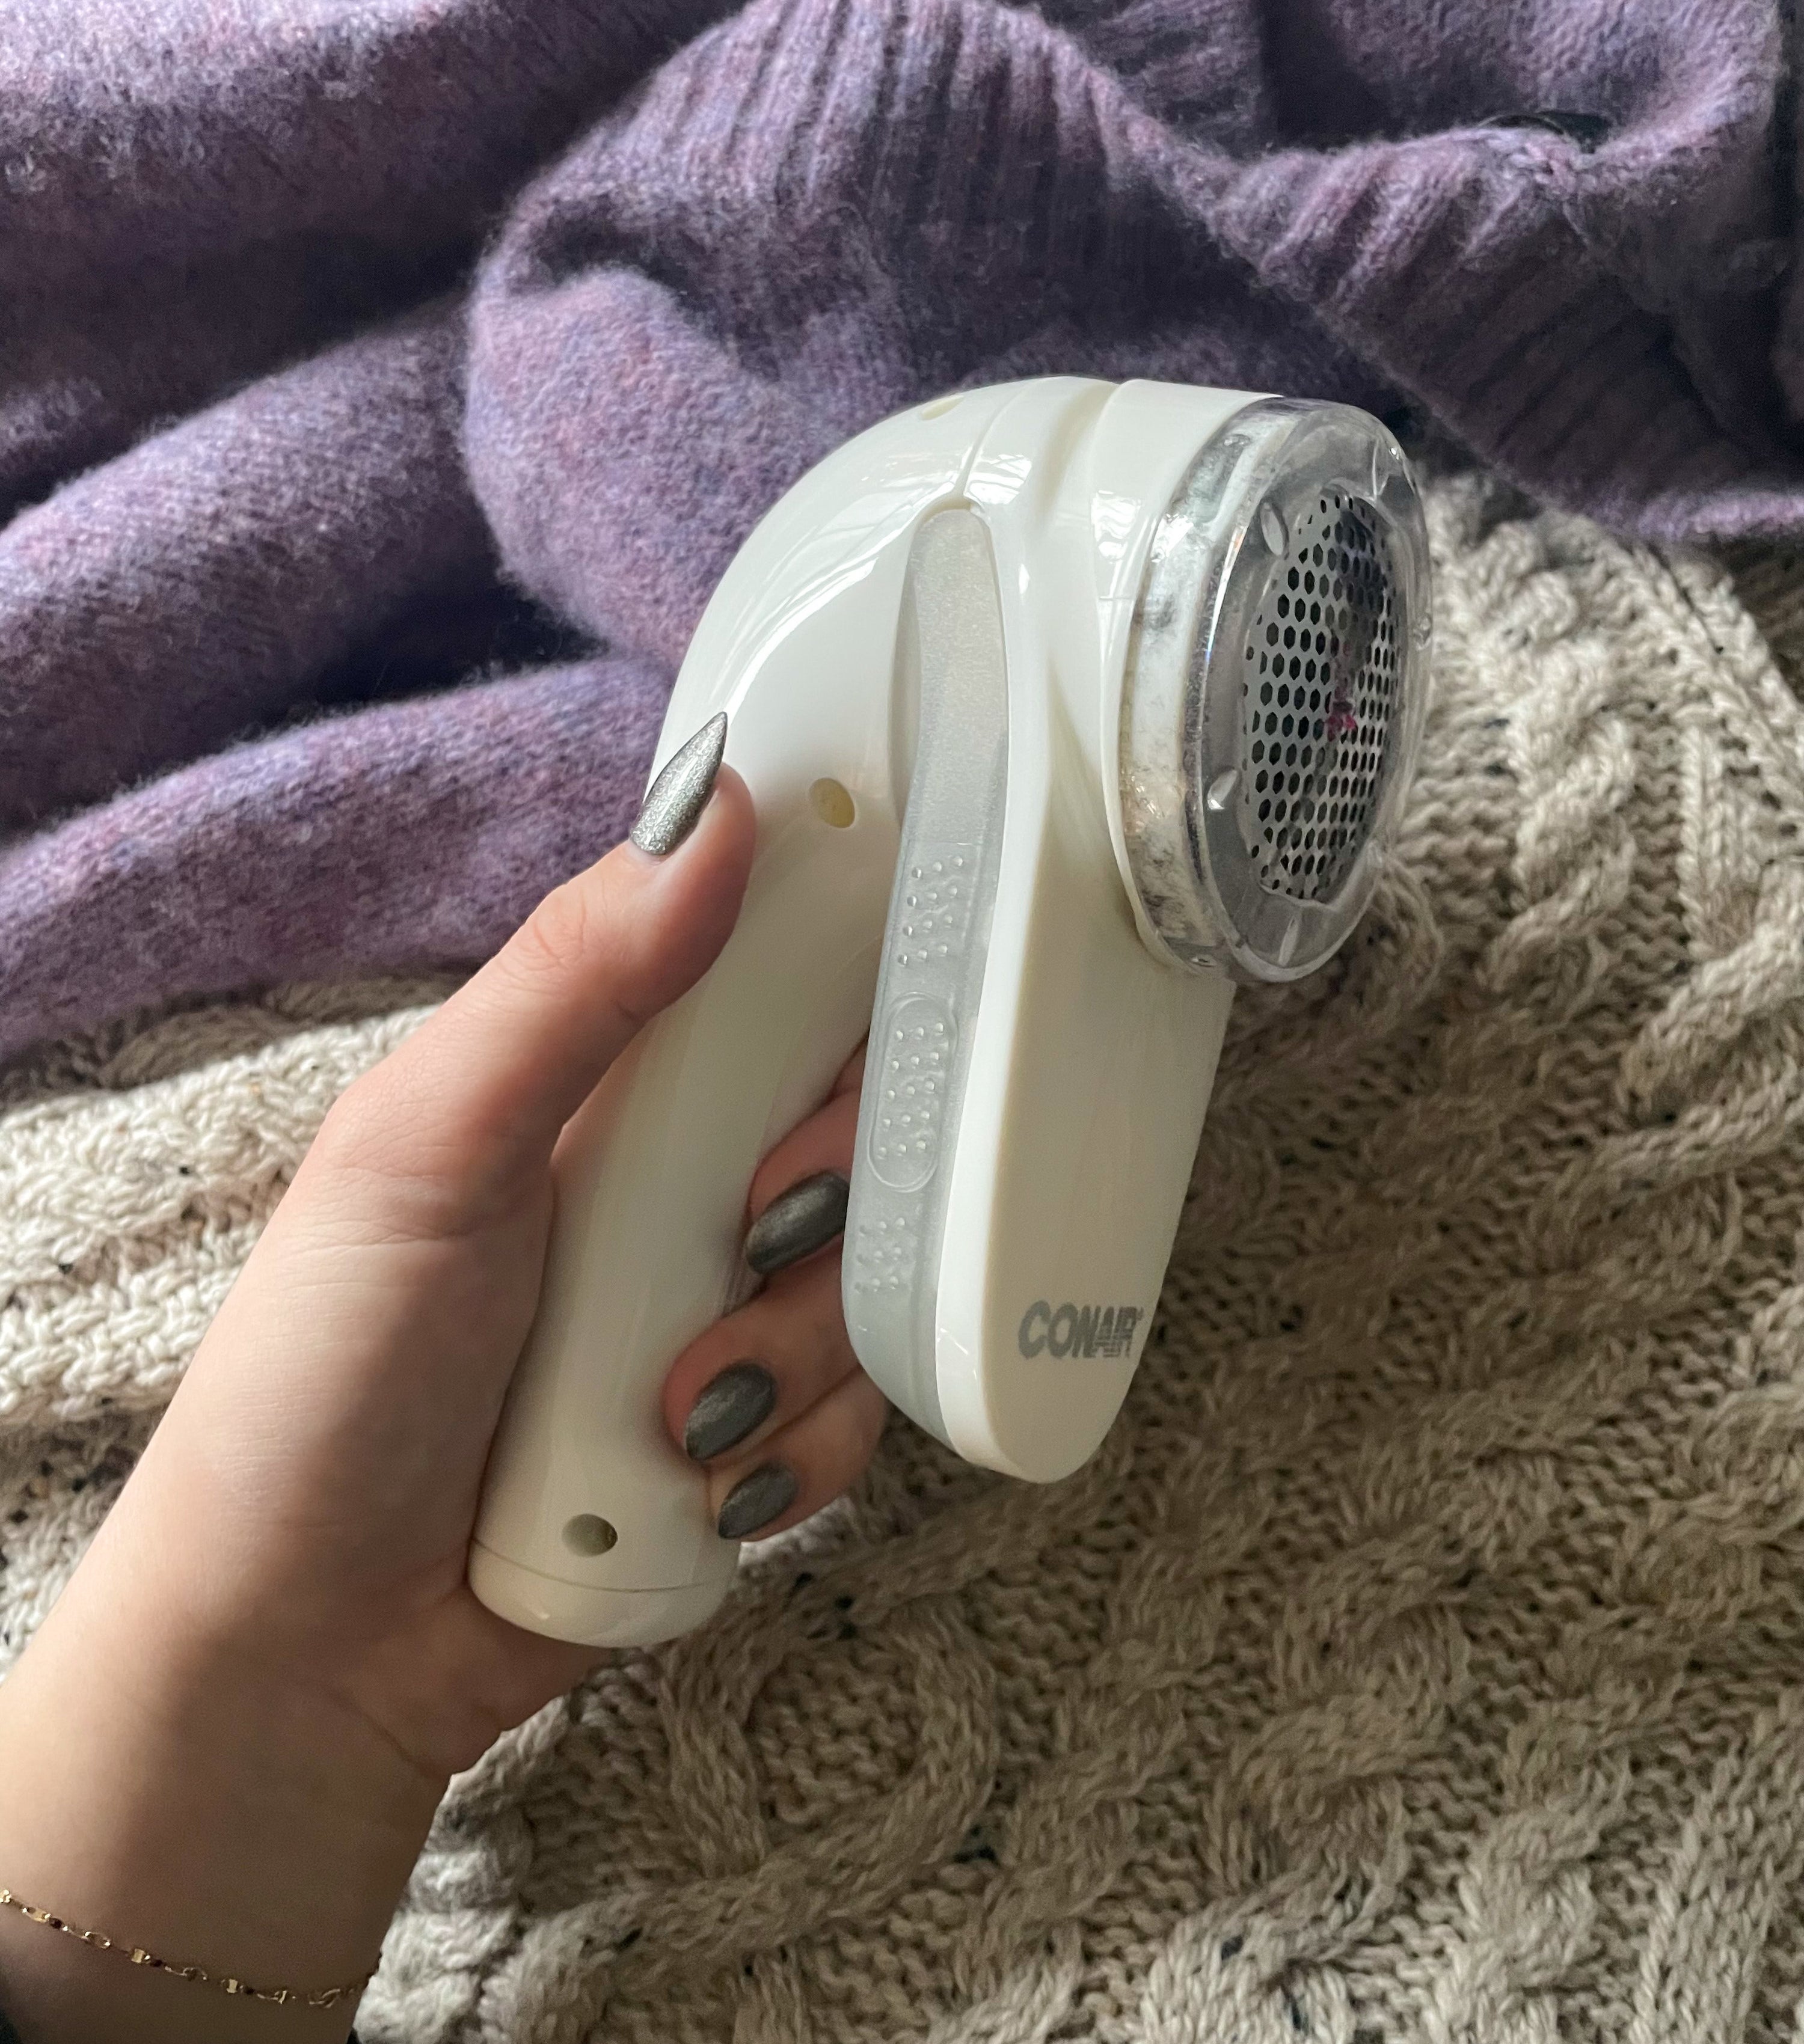 victoria holding up the fabric shaver against a pair of sweaters